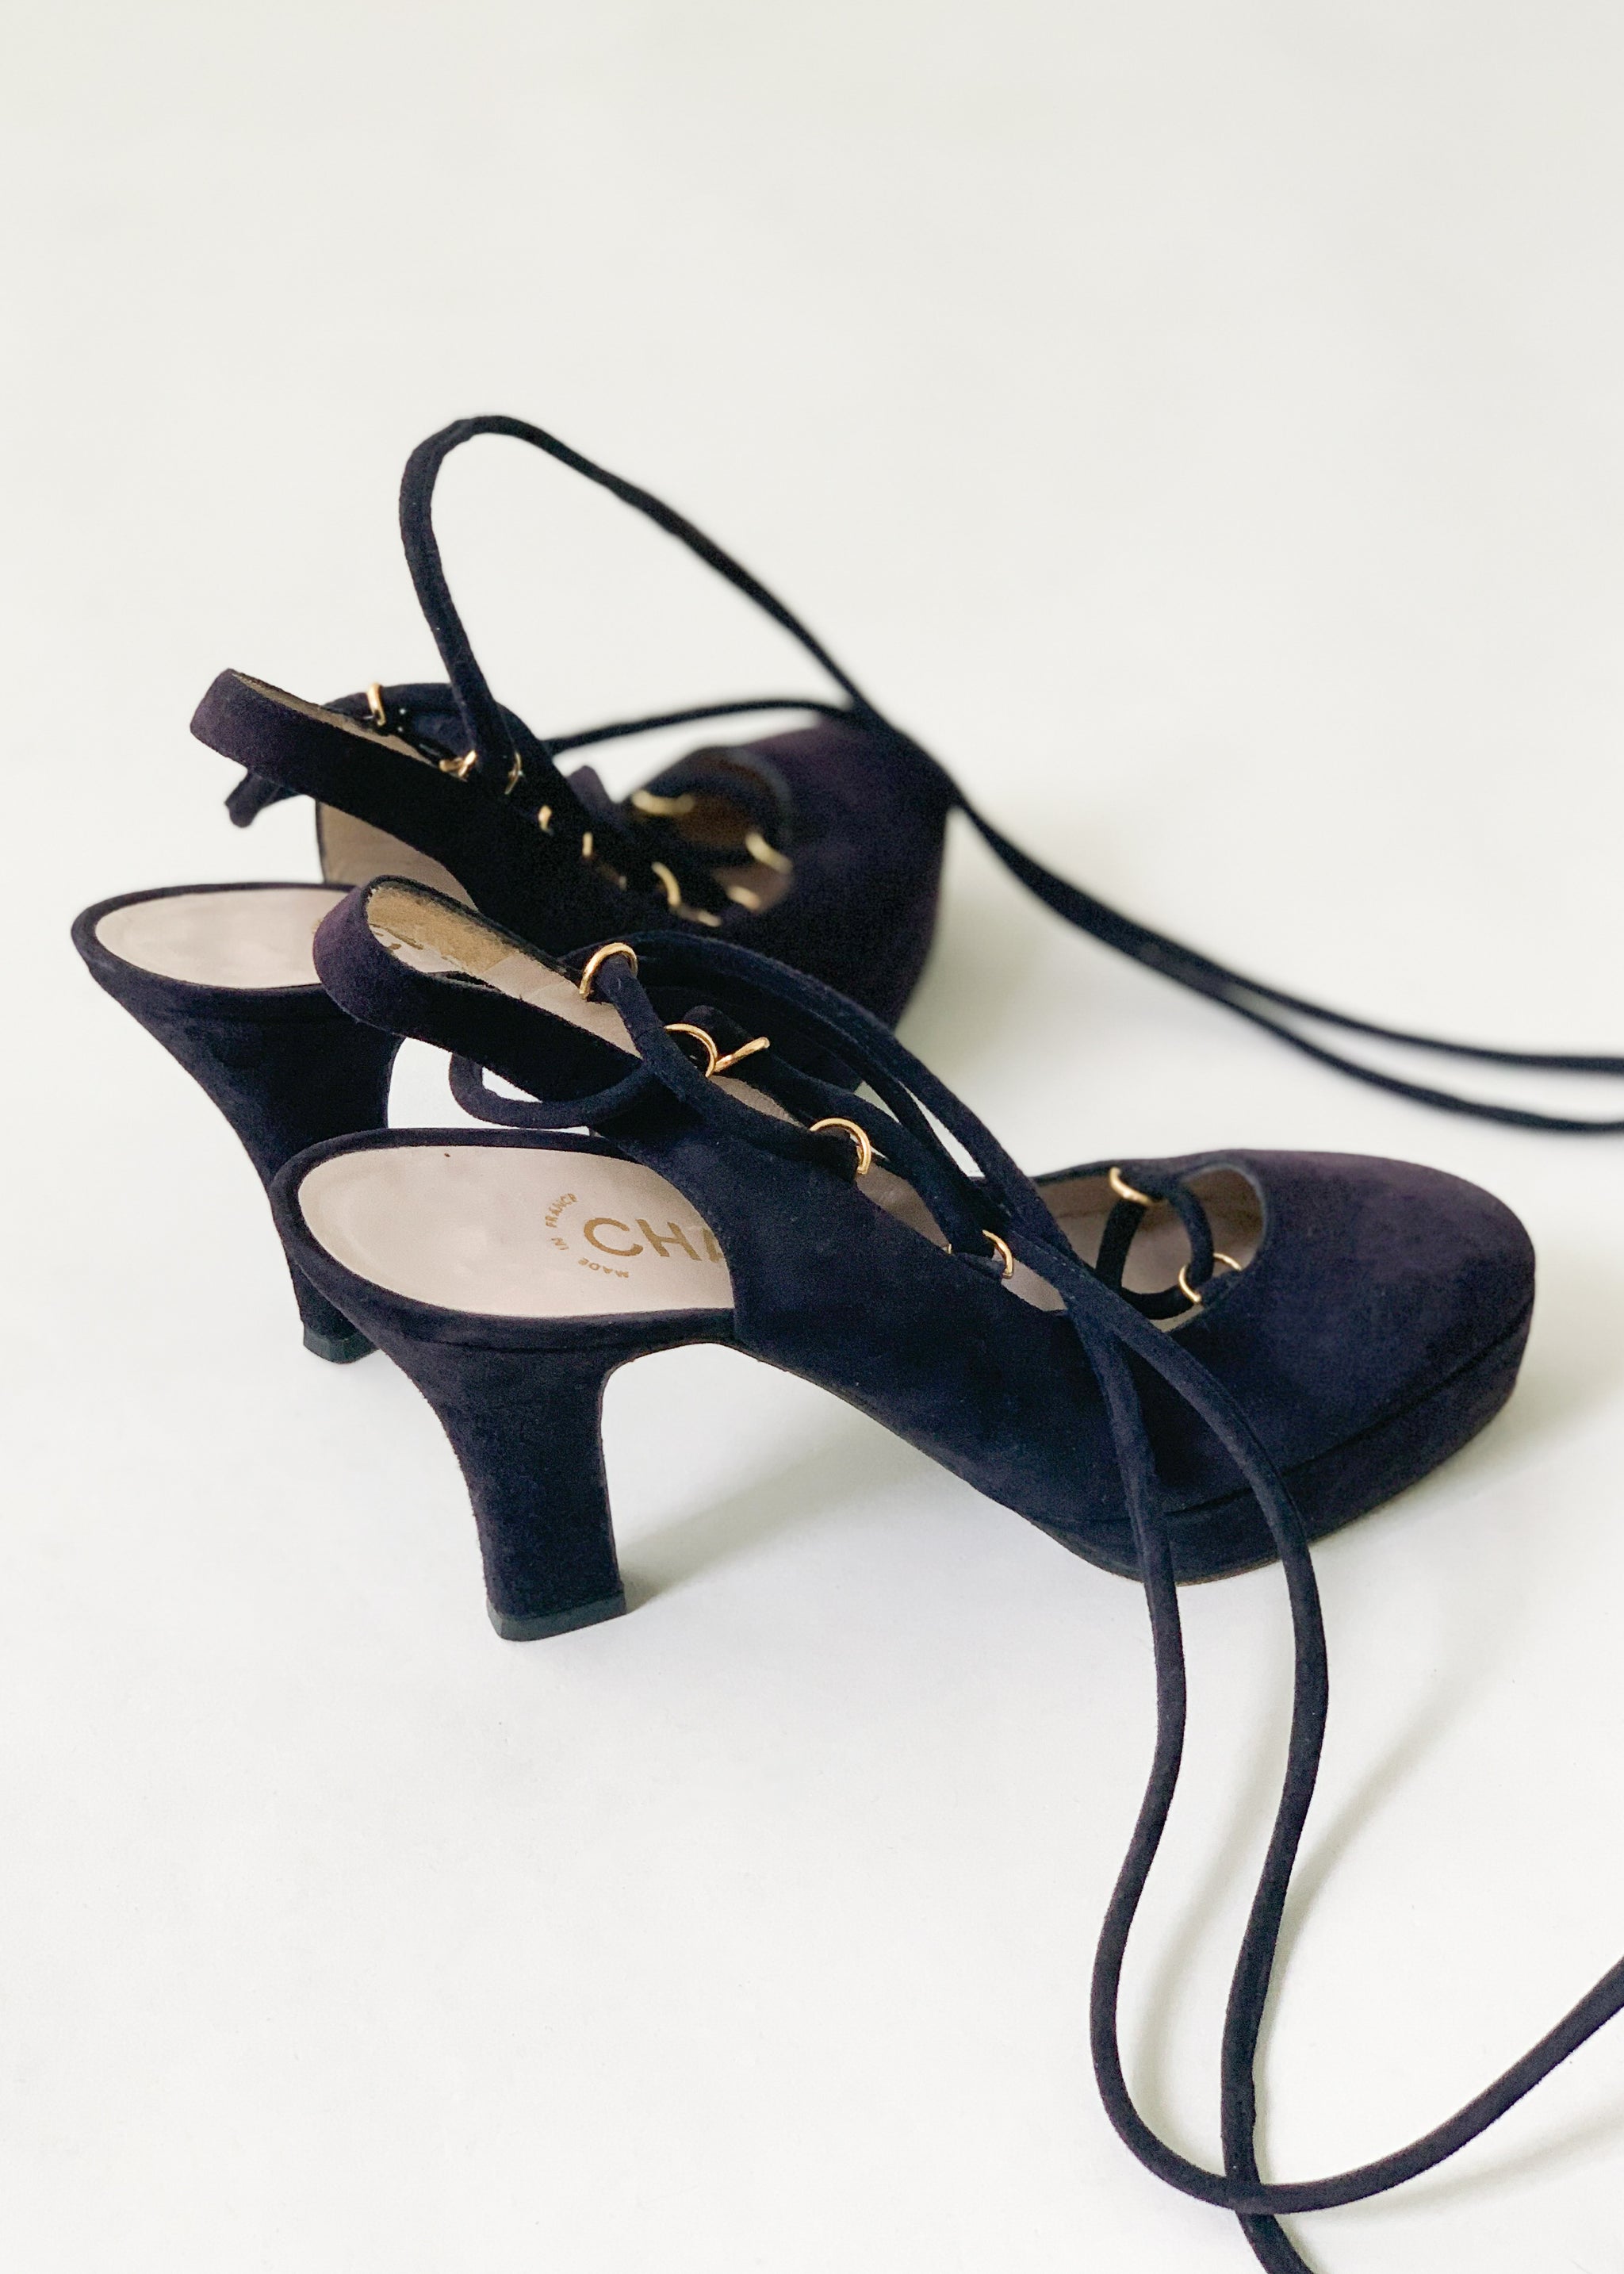 Vintage 1992 Chanel Lace Up Shoes - Raleigh Vintage